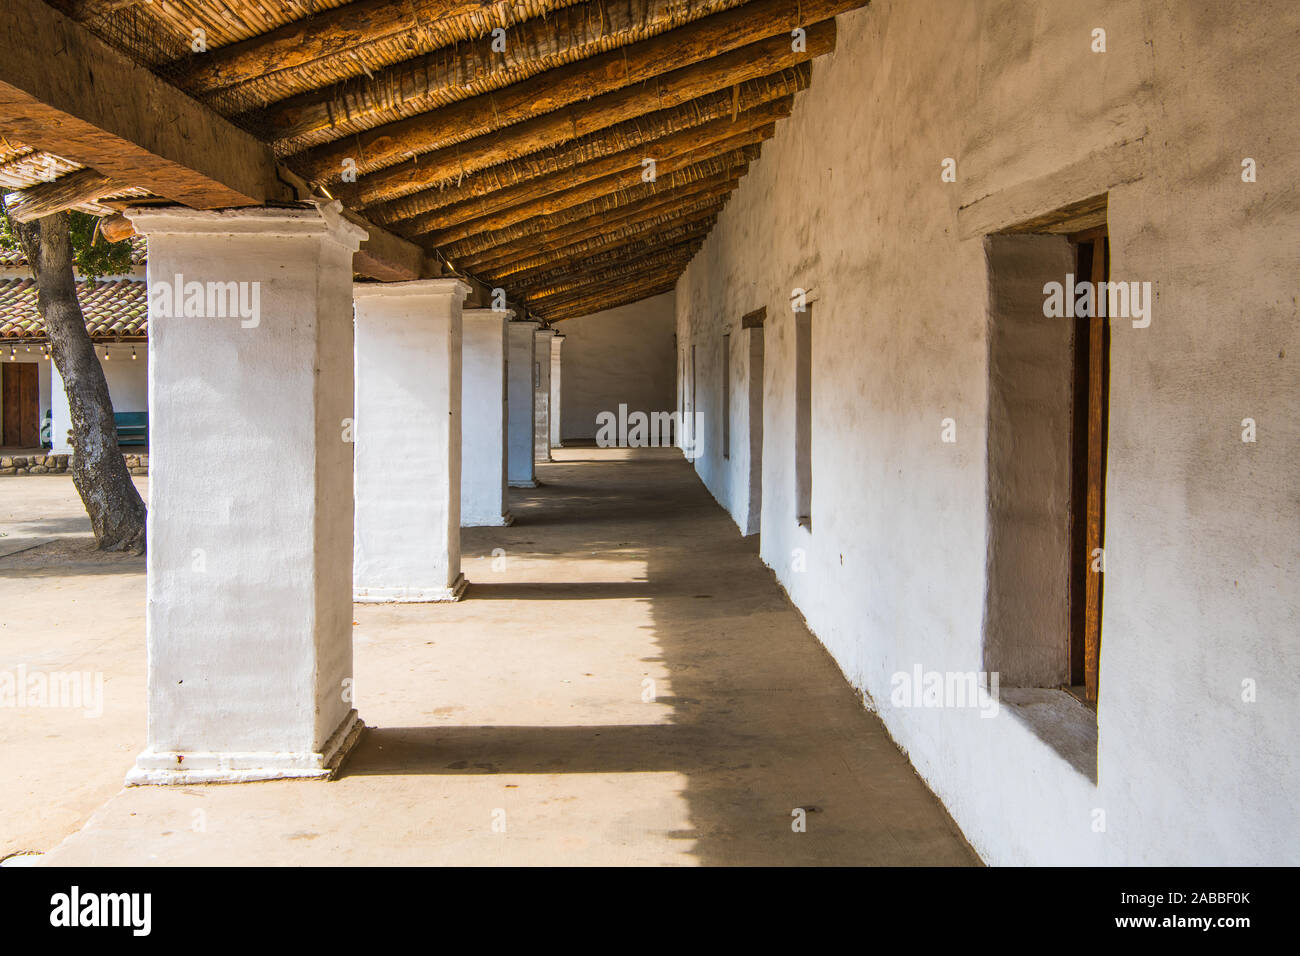 Long exterior corridor with white plastered columns and walls under the rustic wooden roof of an historic Spanish style building in Santa Barbara, Cal Stock Photo